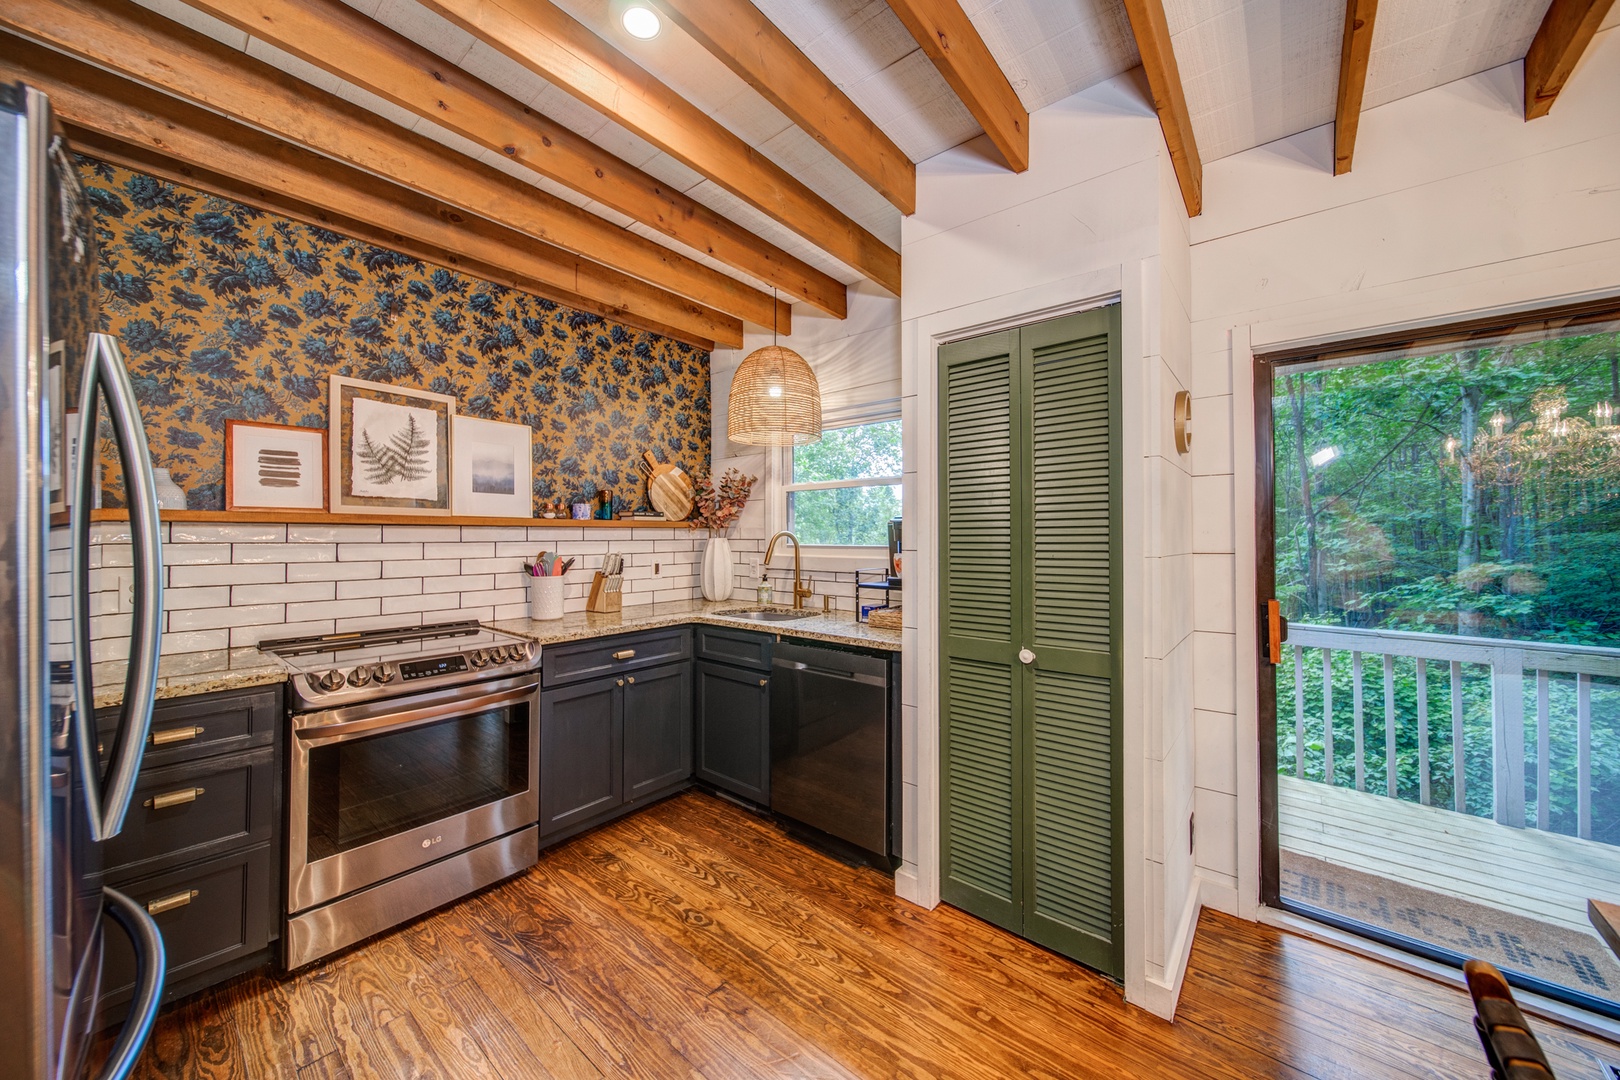 Guests are sure to love the fabulous décor and amenities of the open kitchen